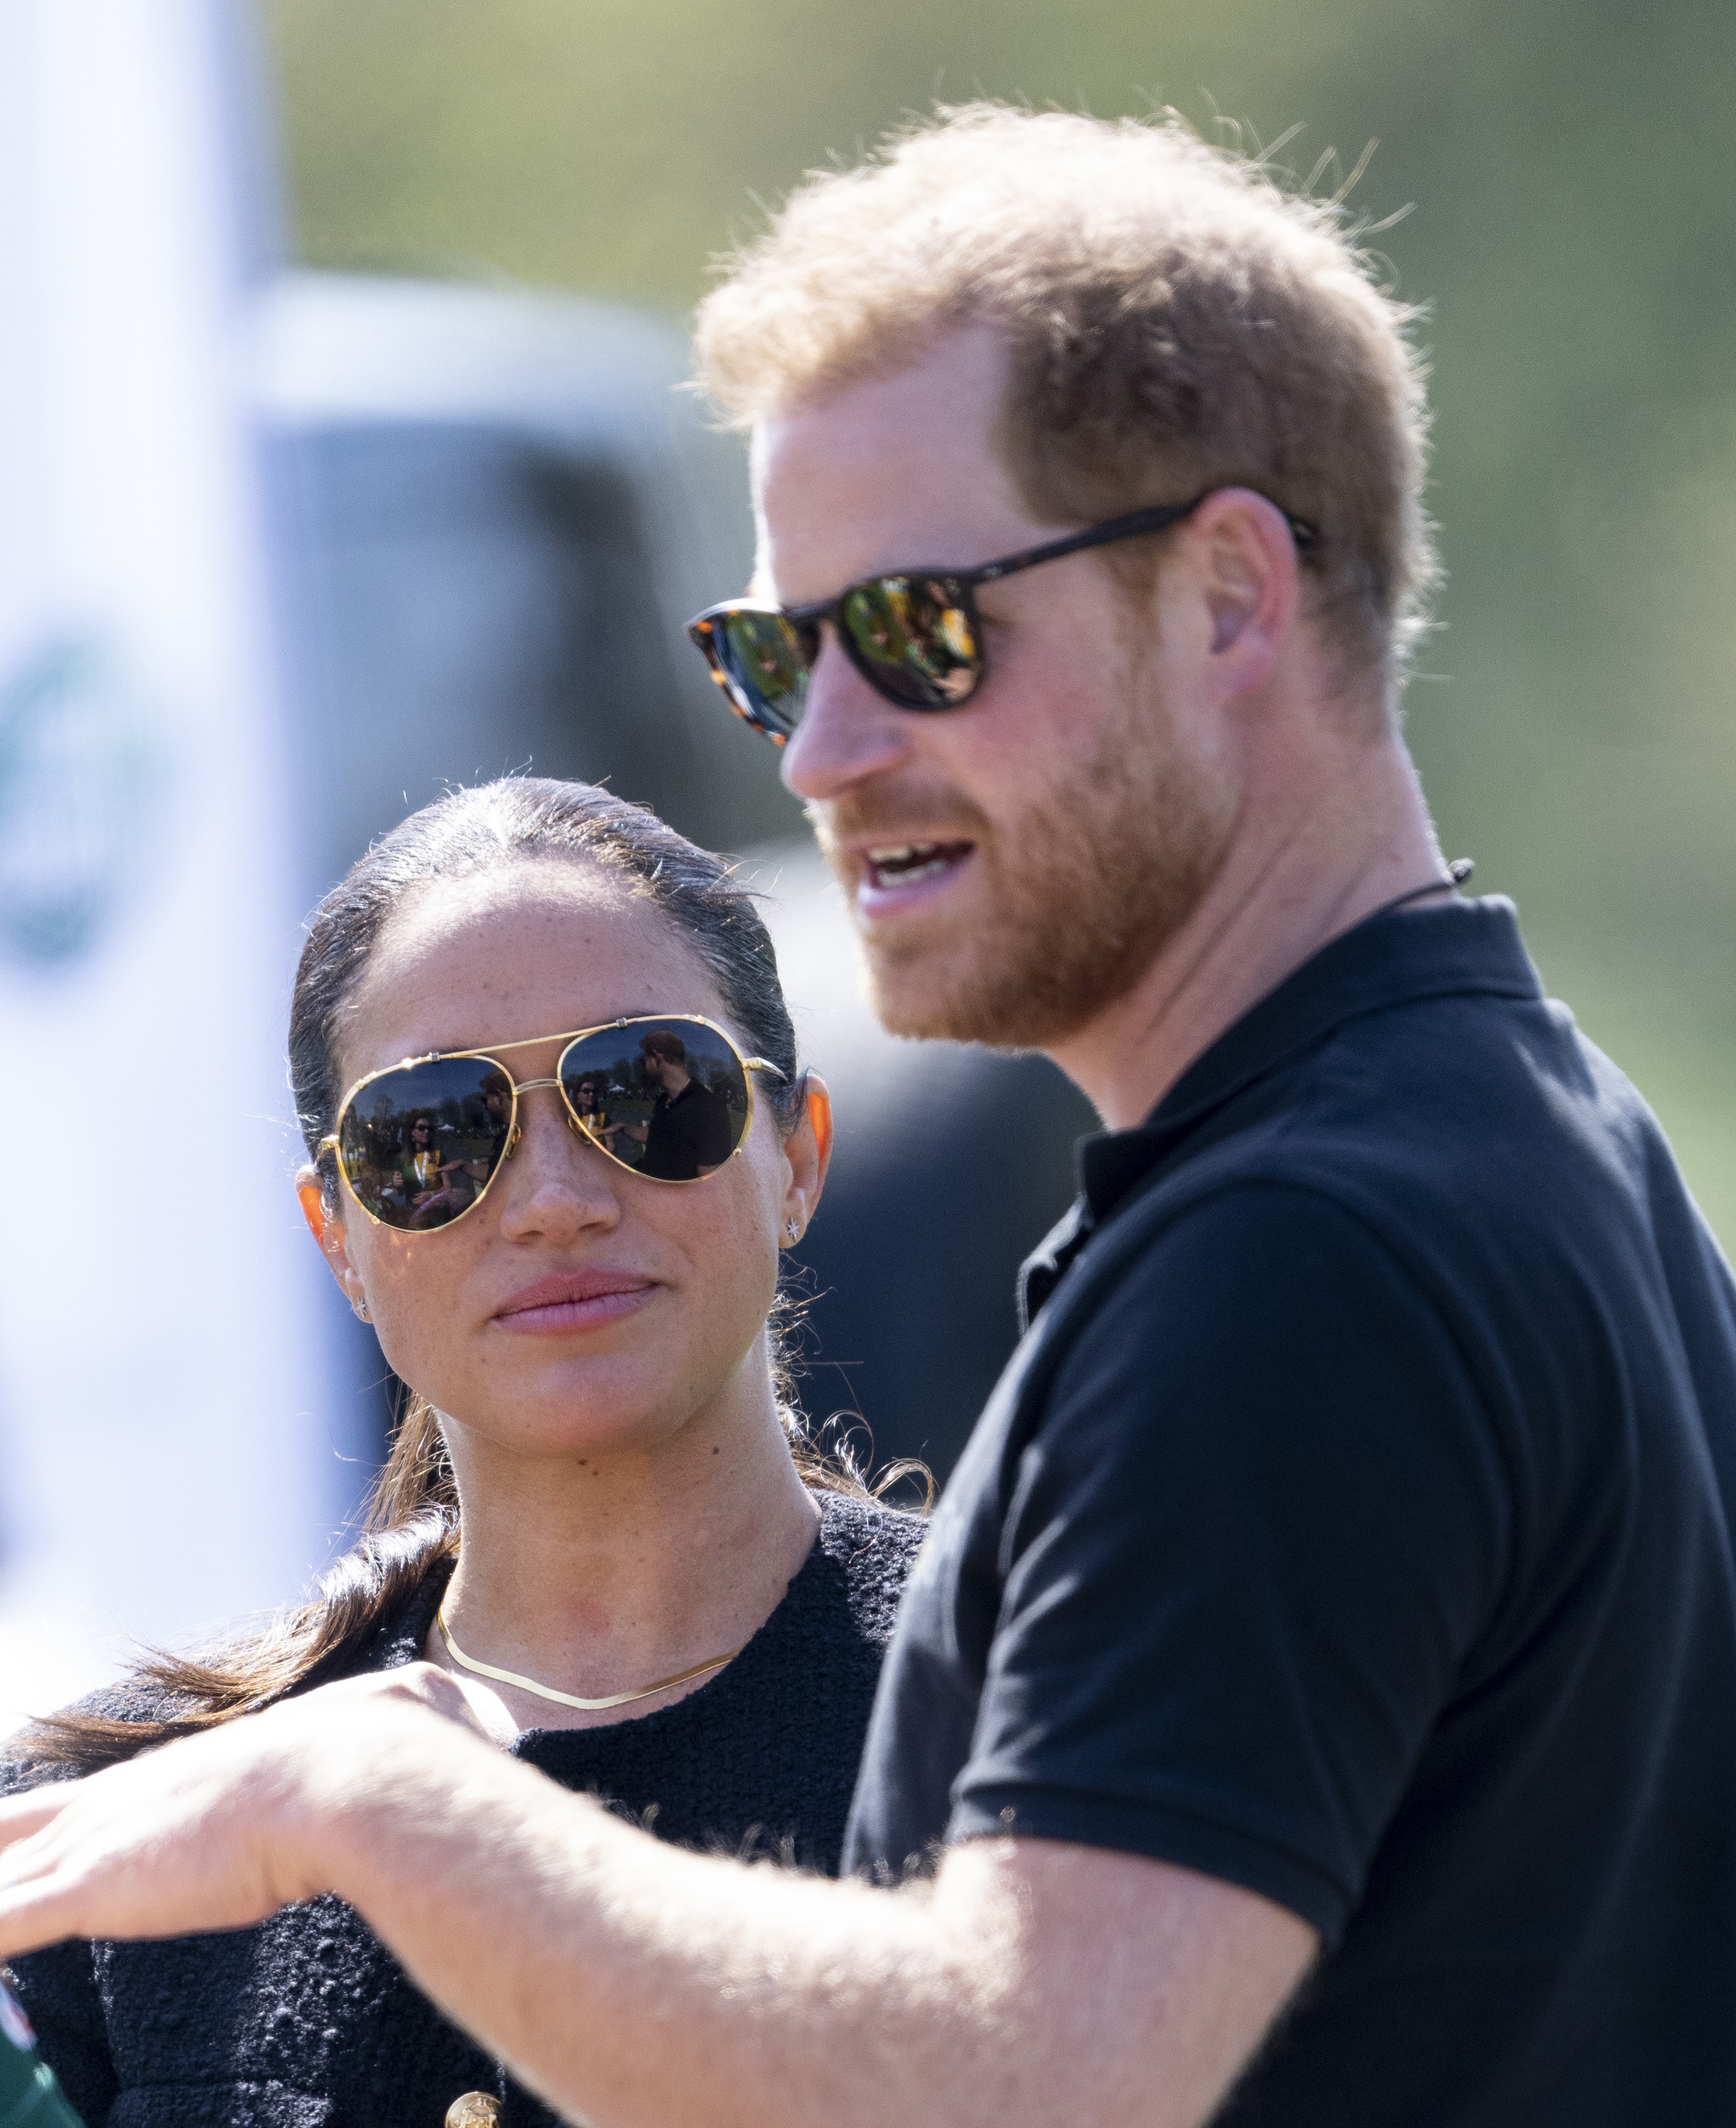 Prince Harry, Duke of Sussex and Meghan, Duchess of Sussex at The Land Rover Driving Challenge during the Invictus Games at Zuiderpark on April 16, 2022 in The Hague, Netherlands. | Source: Getty Images